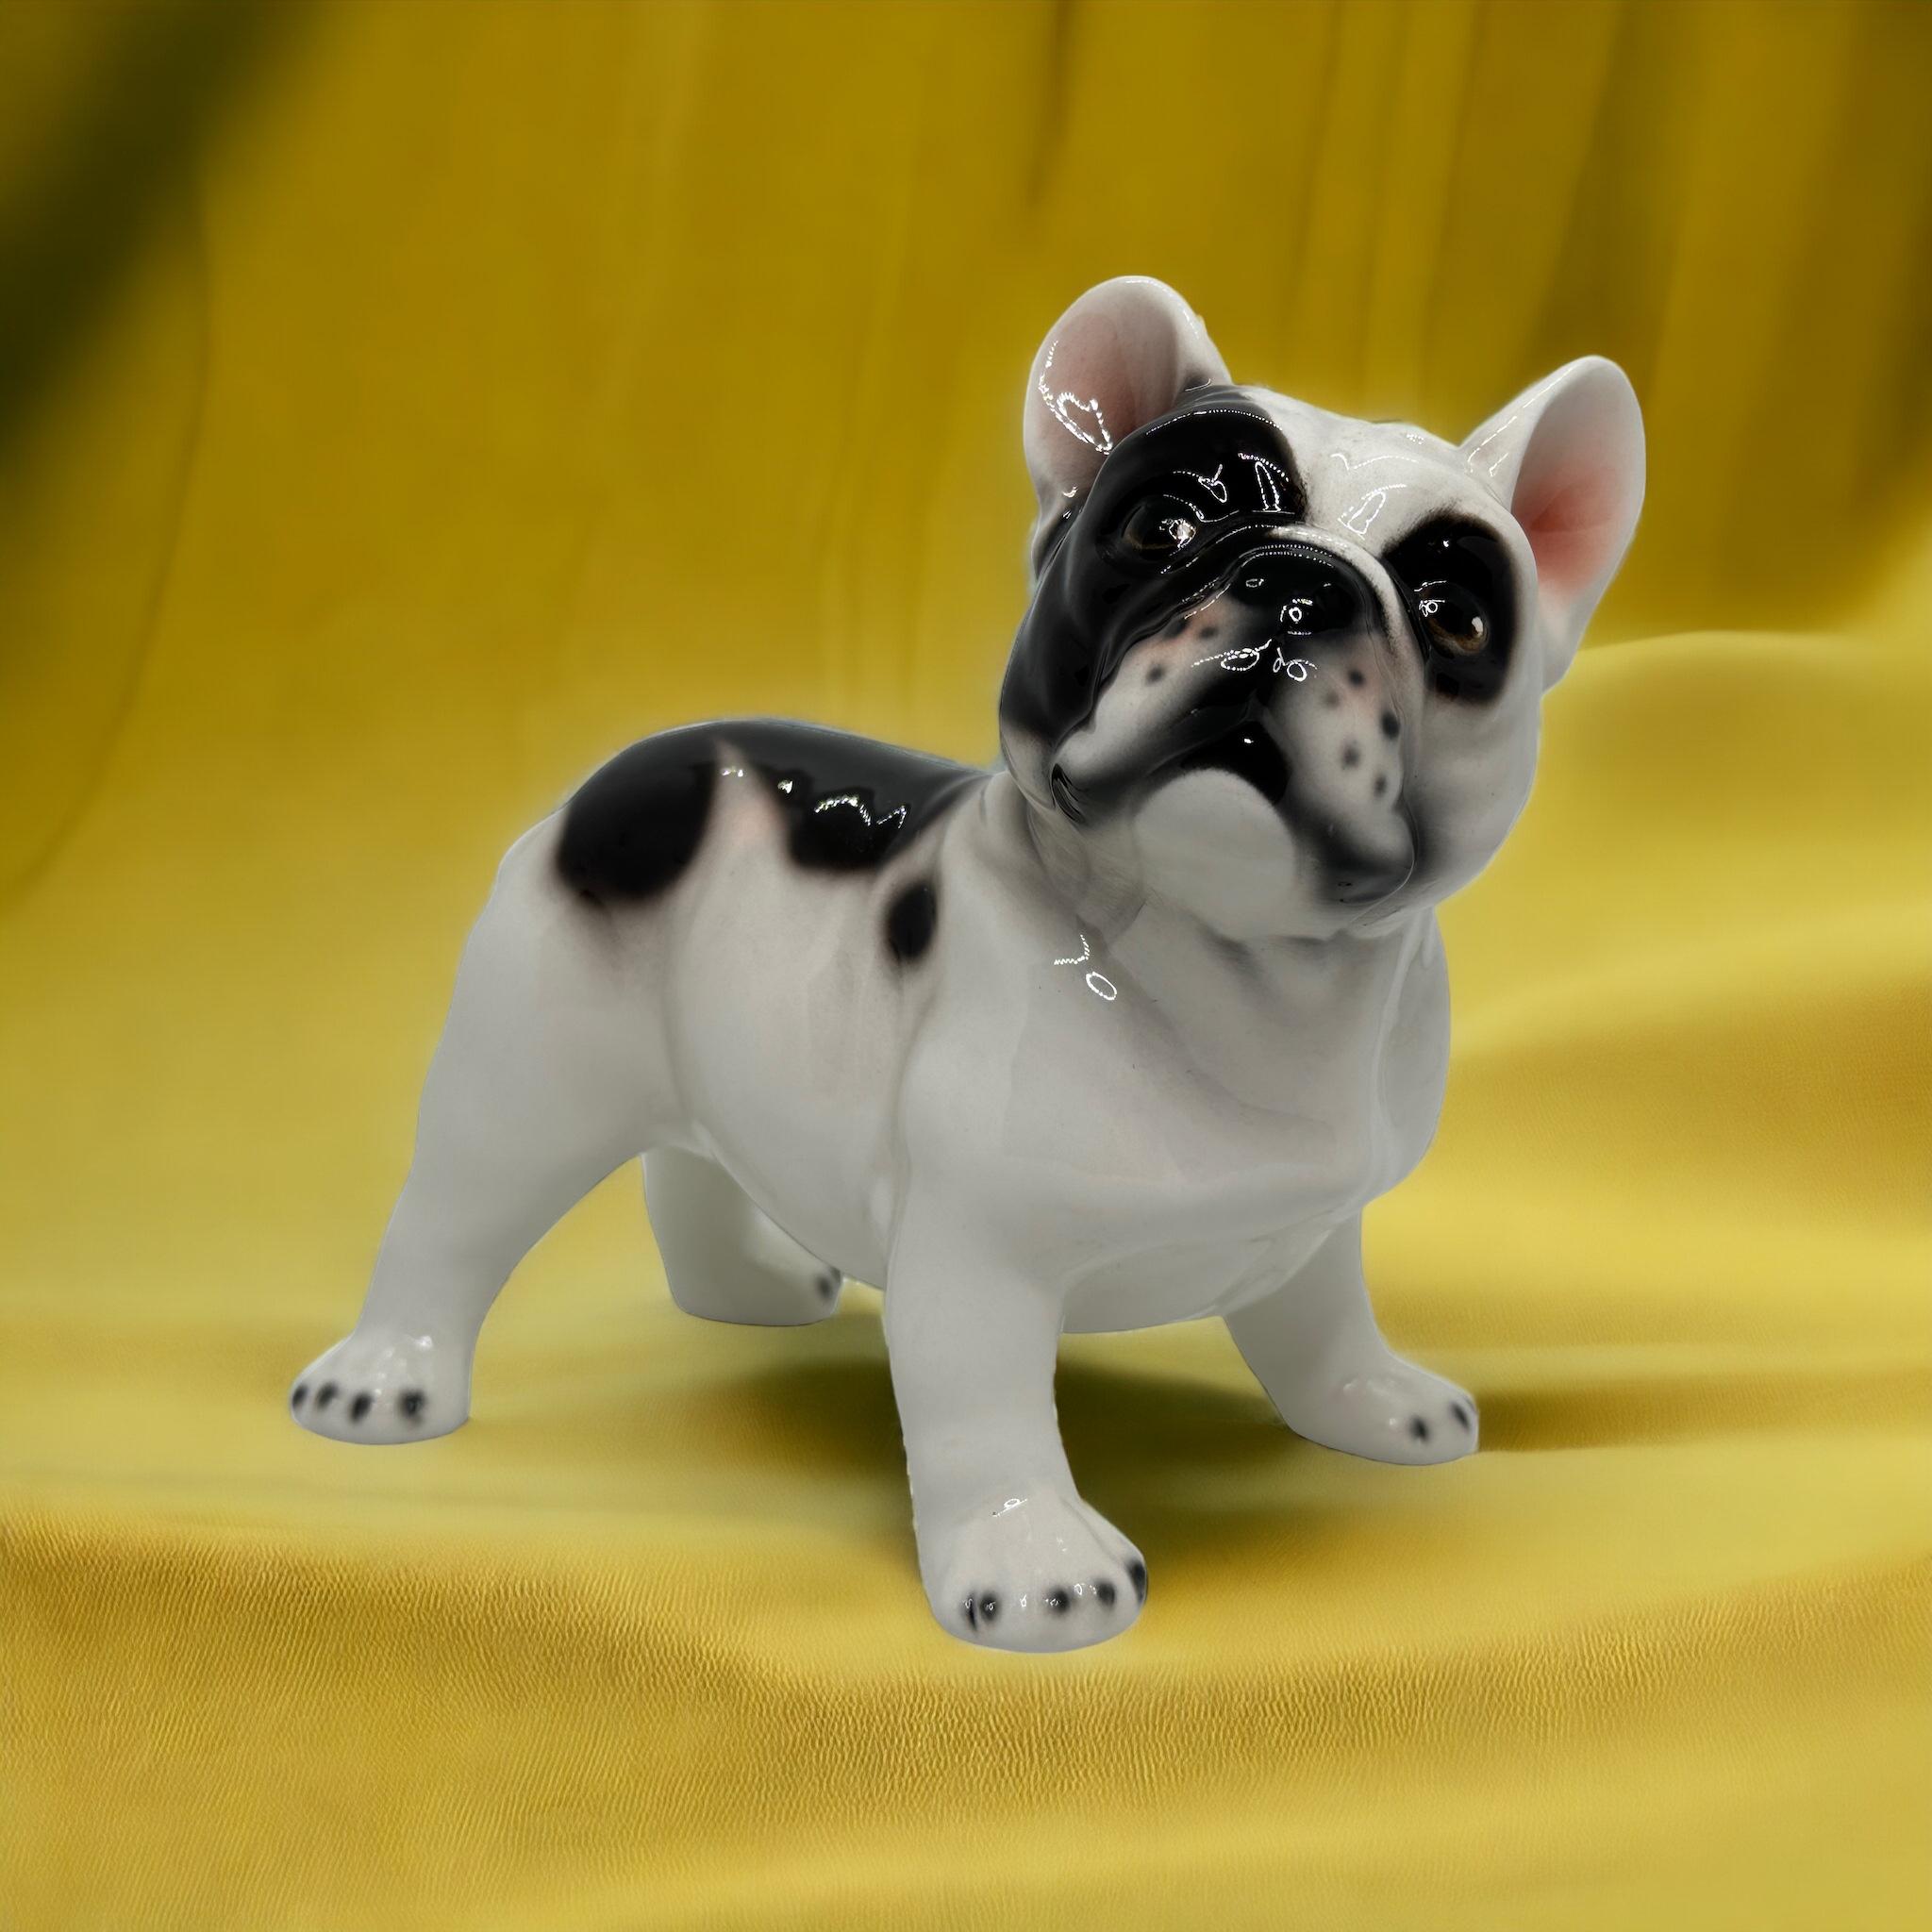 Classic 20th century Ceramic figurine, in beautiful condition. Figurine Statue in the shape of a bull dog in black and white shades. It was made probably in the 1980s in Italy, it is marked at the belly.
Nice addition to your credenza or just for